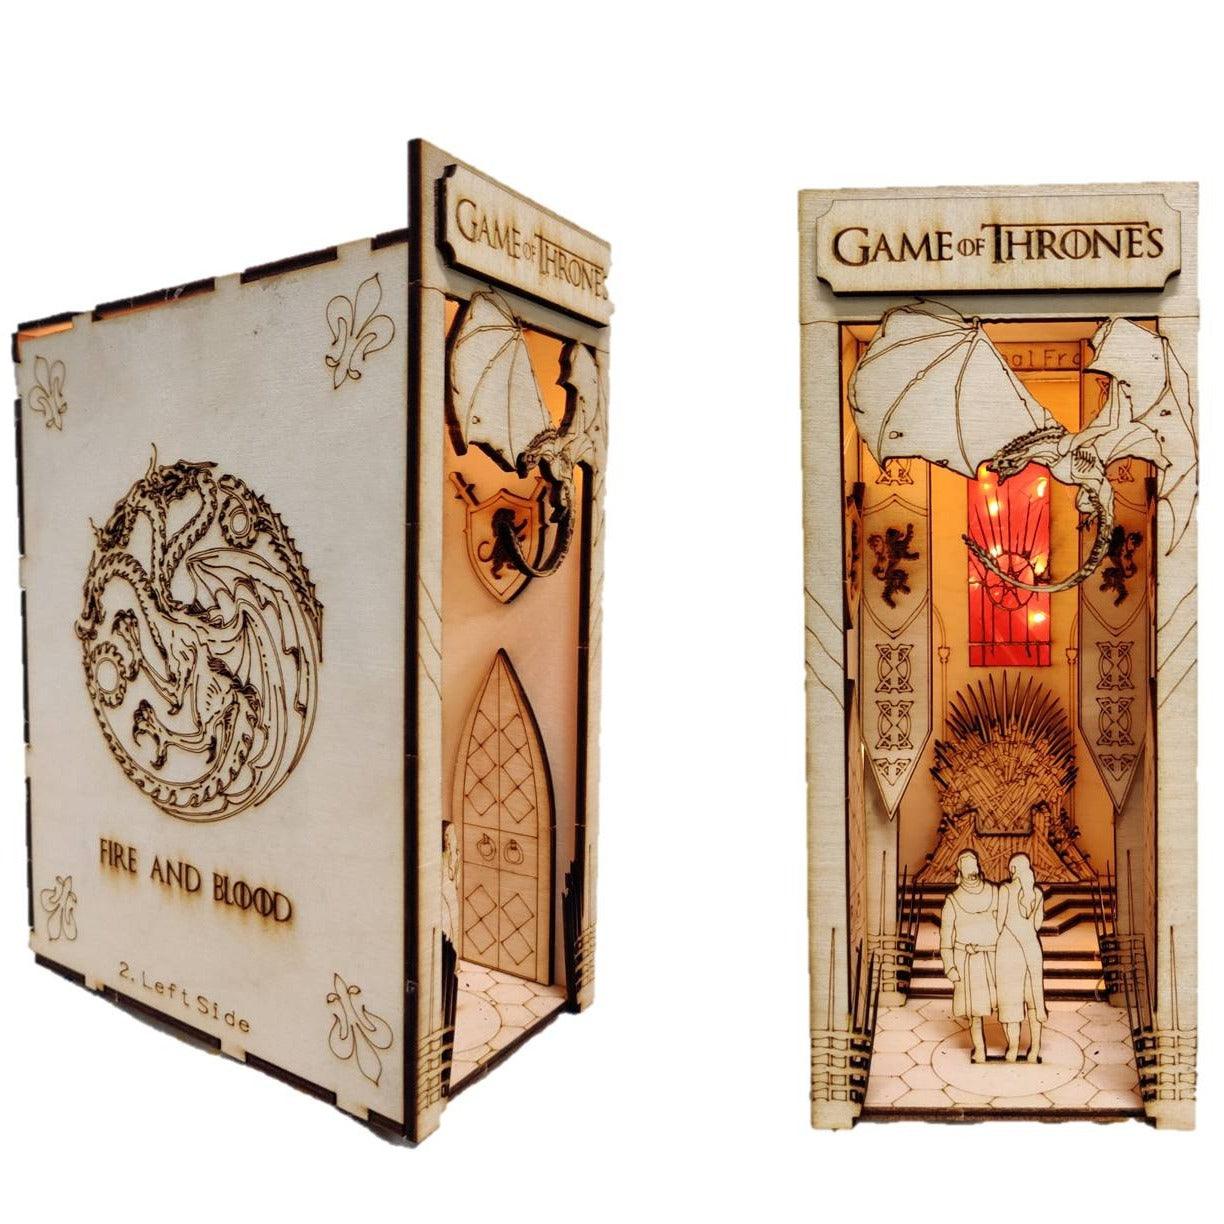 Game Of Thrones Book Nook DIY Book Nook Kits House Of Dragon Book Shelf Inserts - Rajbharti Crafts